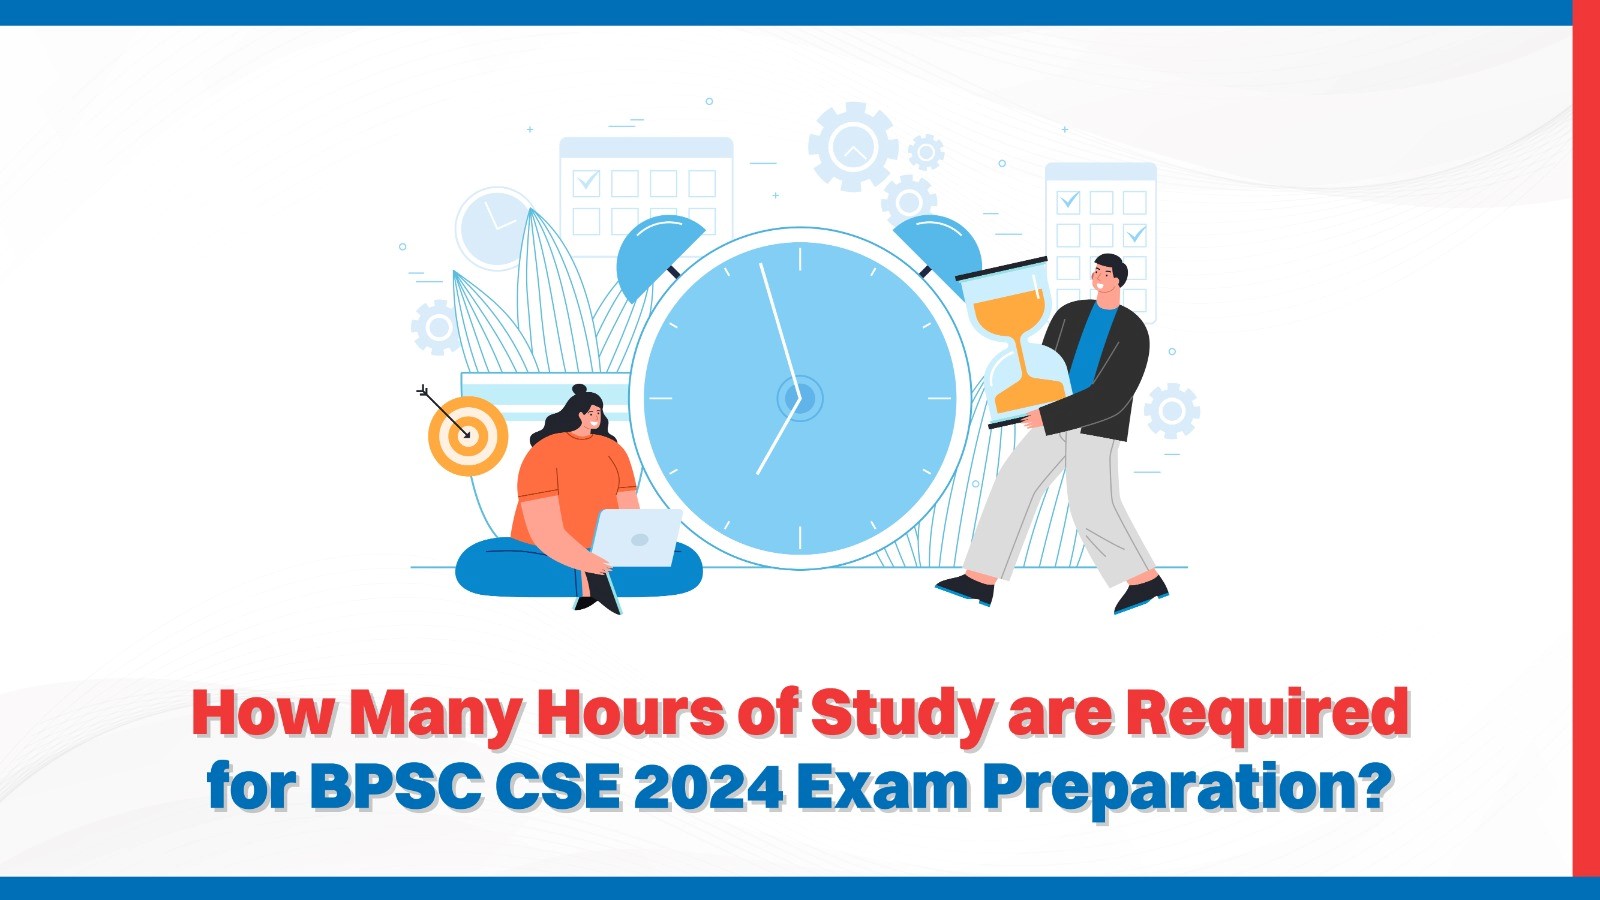 How Many Hours of Study are Required for BPSC CSE 2024 Exam Preparation.jpg